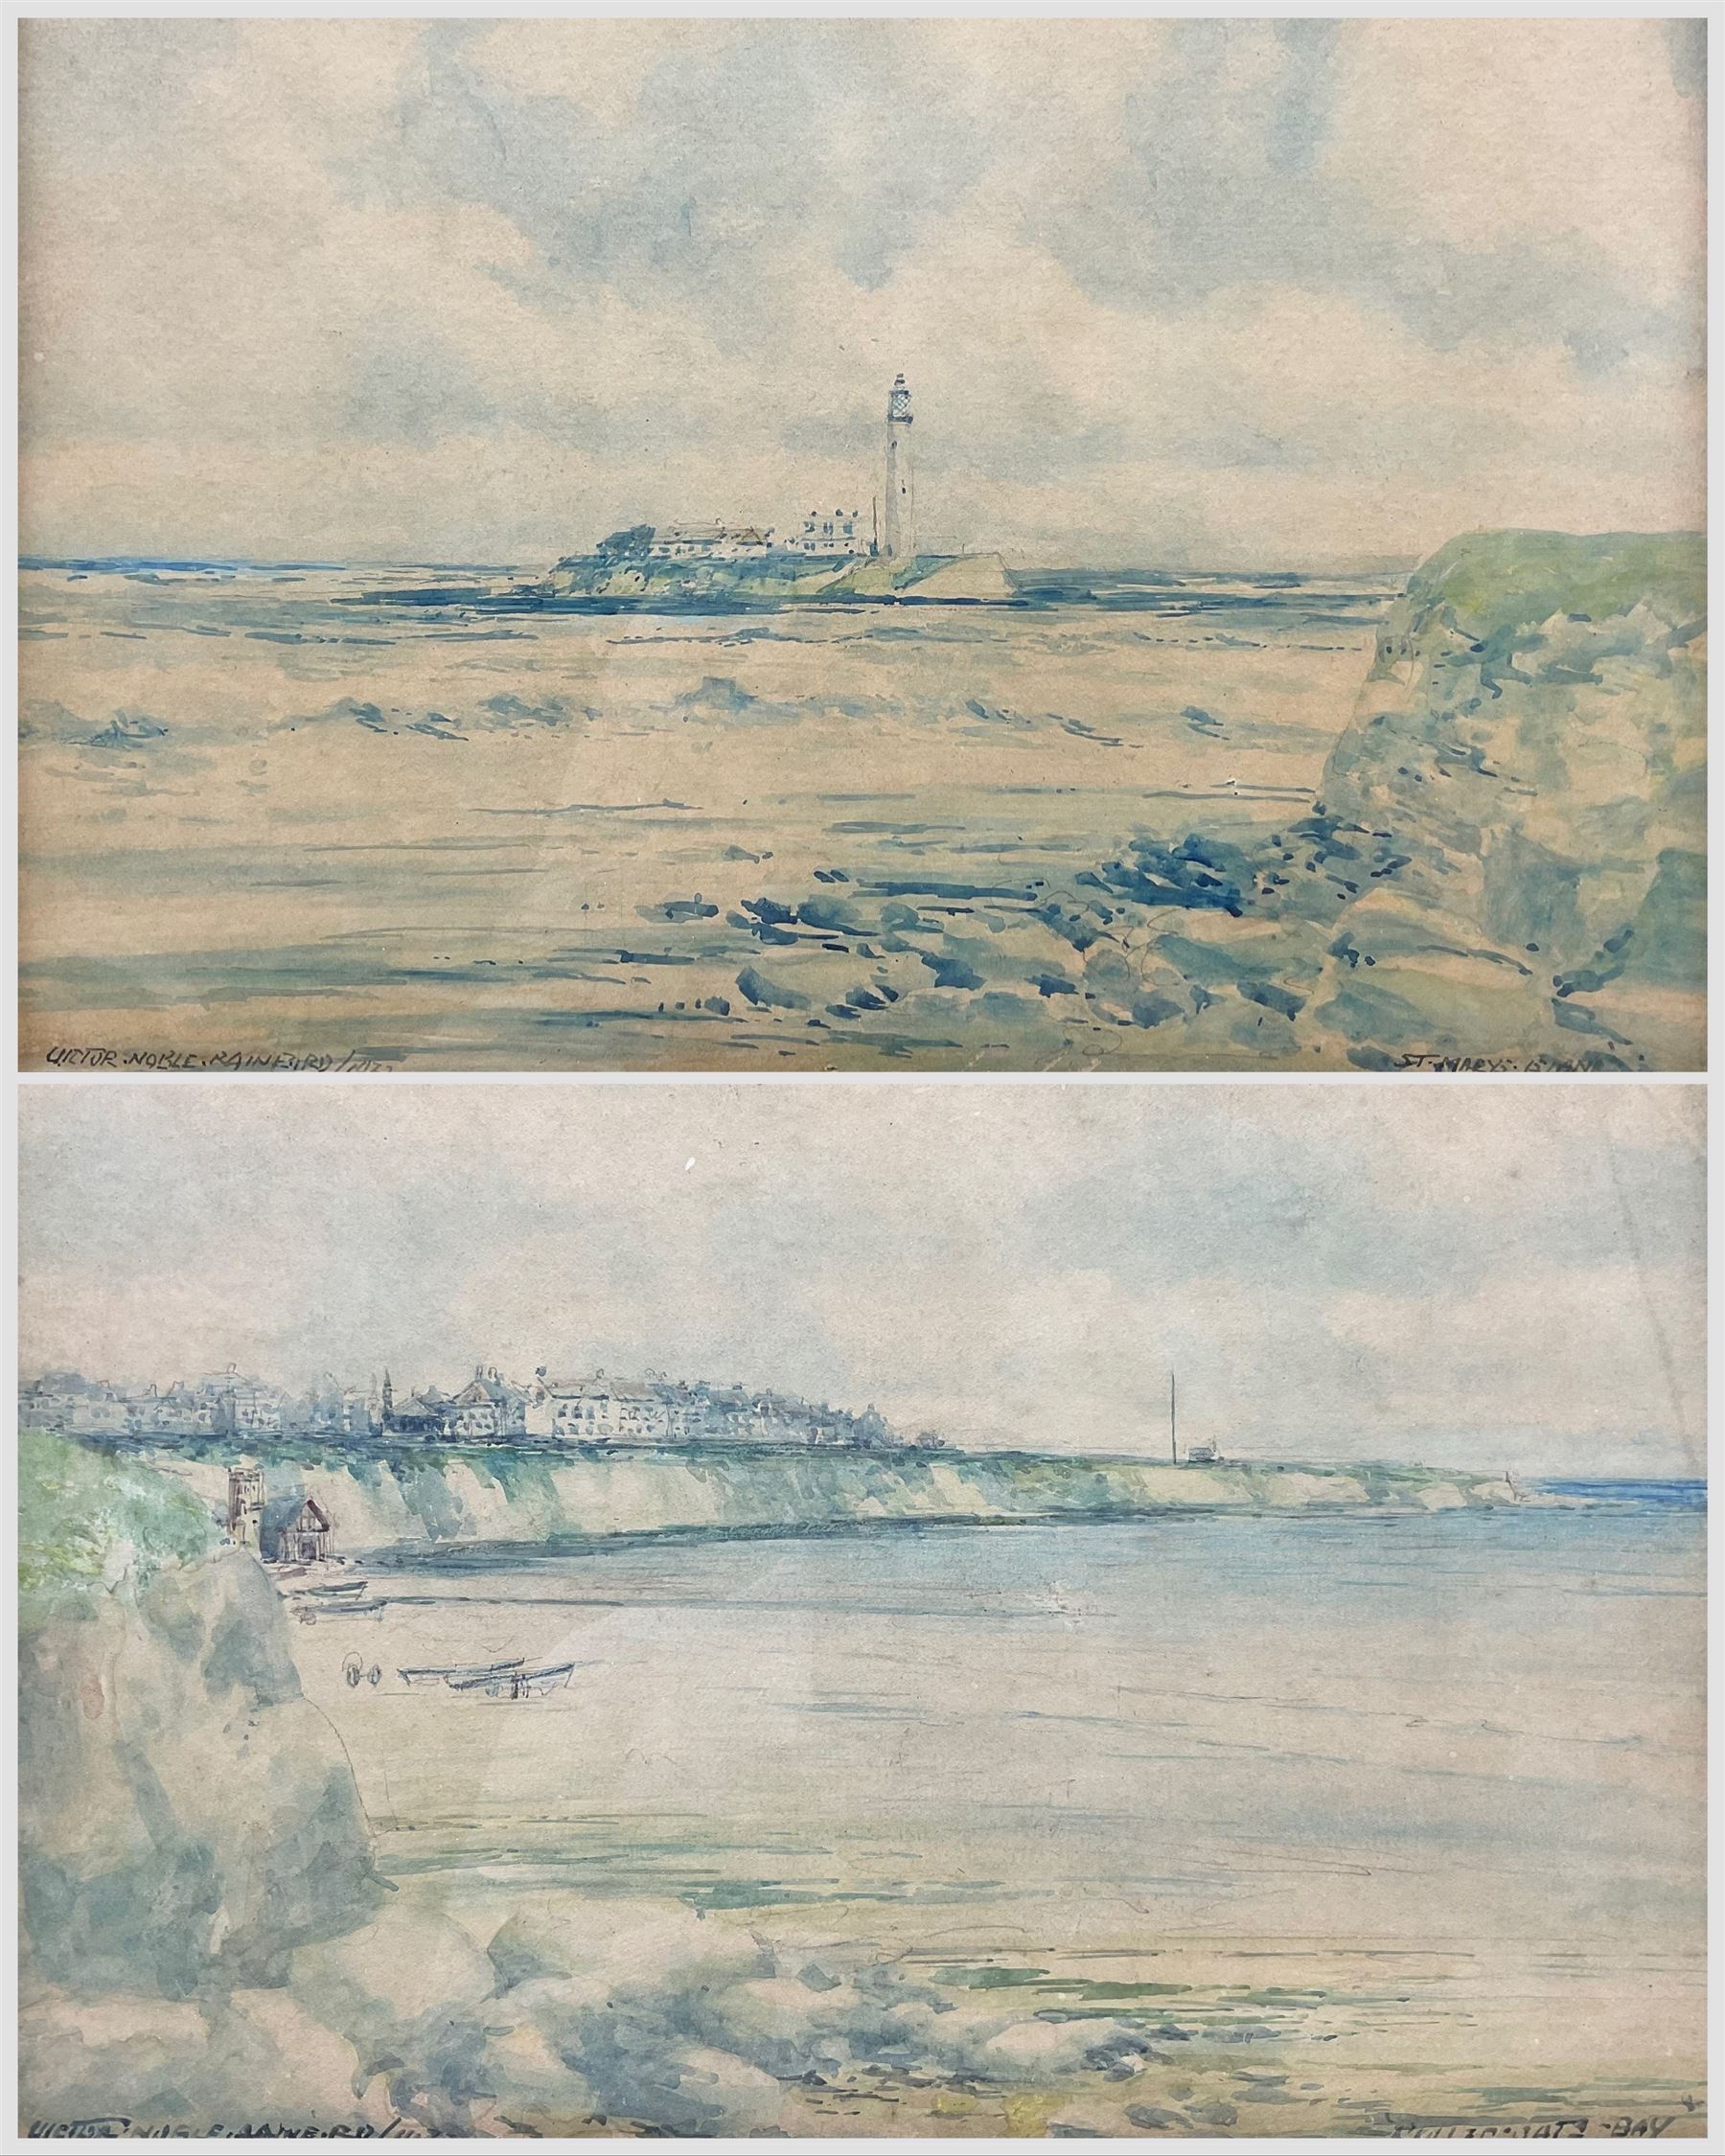 Victor Noble Rainbird (British 1887-1936): 'St Mary's Island' and 'Cullercoats Bay'